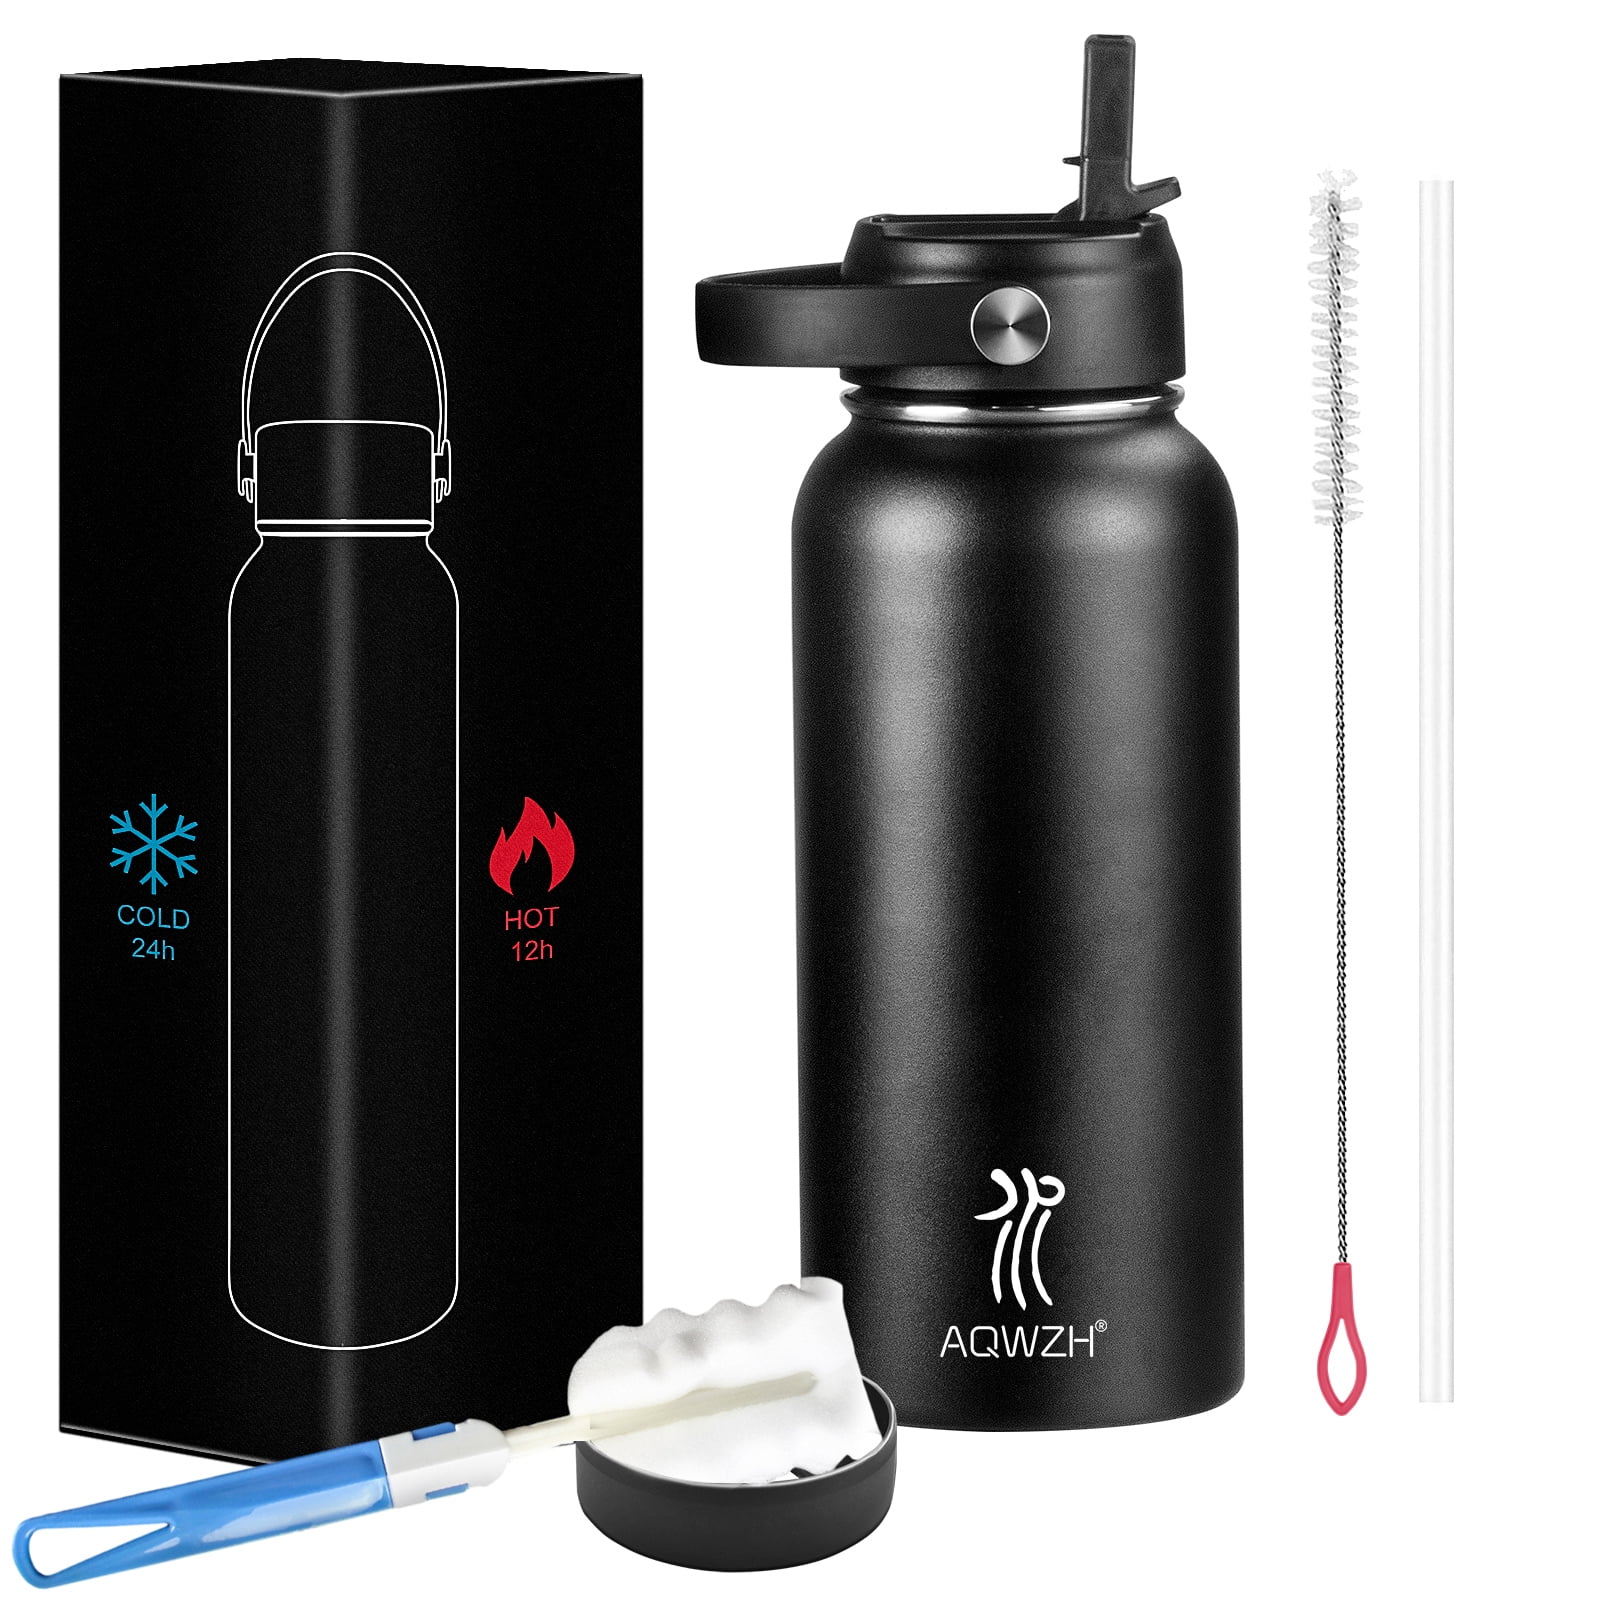 DUIERA 32oz Stainless Steel Water Bottle Vacuum Insulated Water Bottle with  Straw & Leak Proof Spout Lids, BPA Free, Keep Cold or Hot - Black